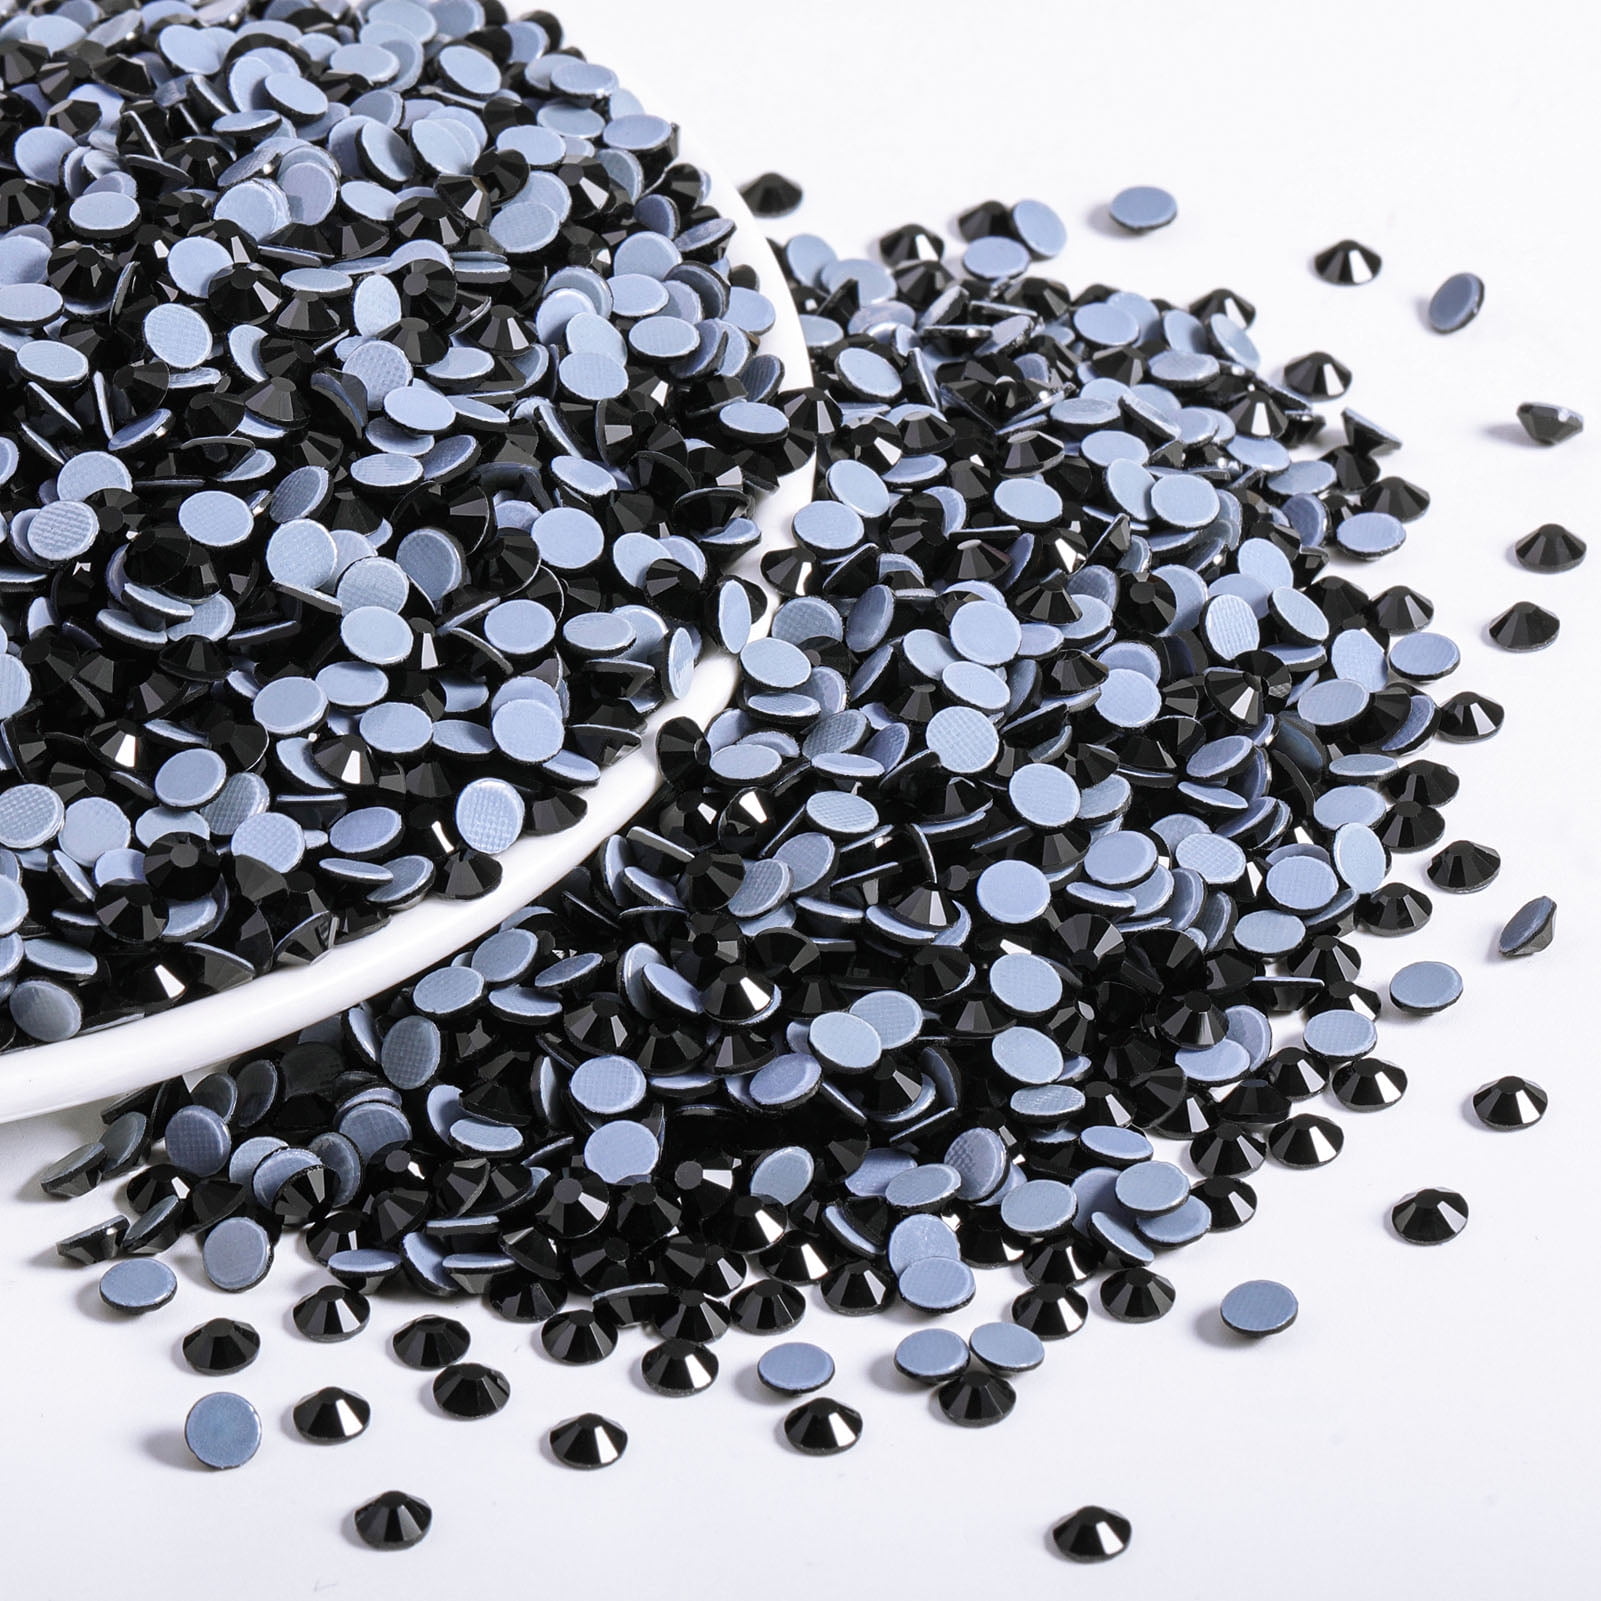  HTVRONT Rhinestones for Crafting, Black Hotfix Rhinestones Come  with Hot Melting Glue, Bright Color & Shining Flatback Rhinestones for  Nails, Clothes, Decoration and Handicraft（SS10 2880pcs）